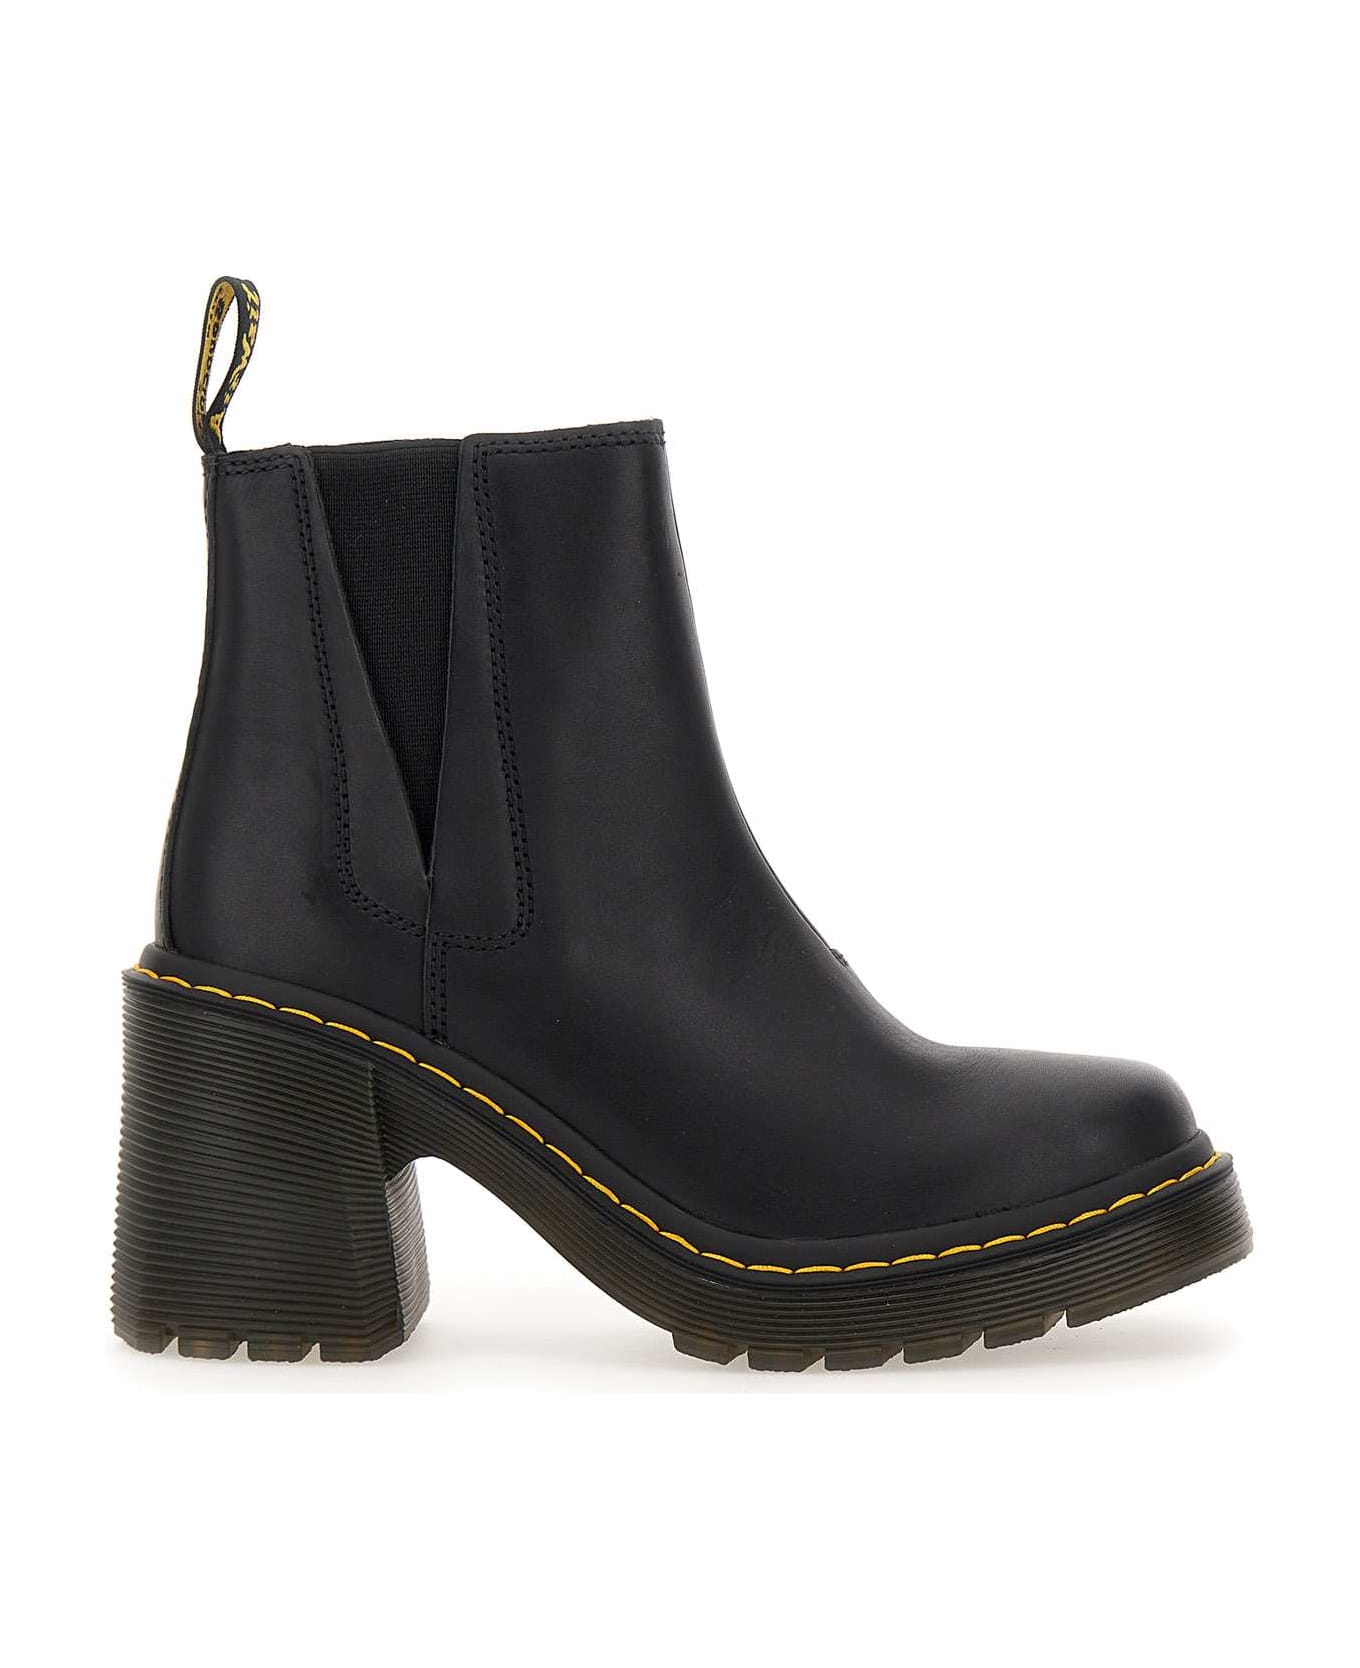 Dr. Martens Spence Leather Ankle Boots - BLACK ブーツ